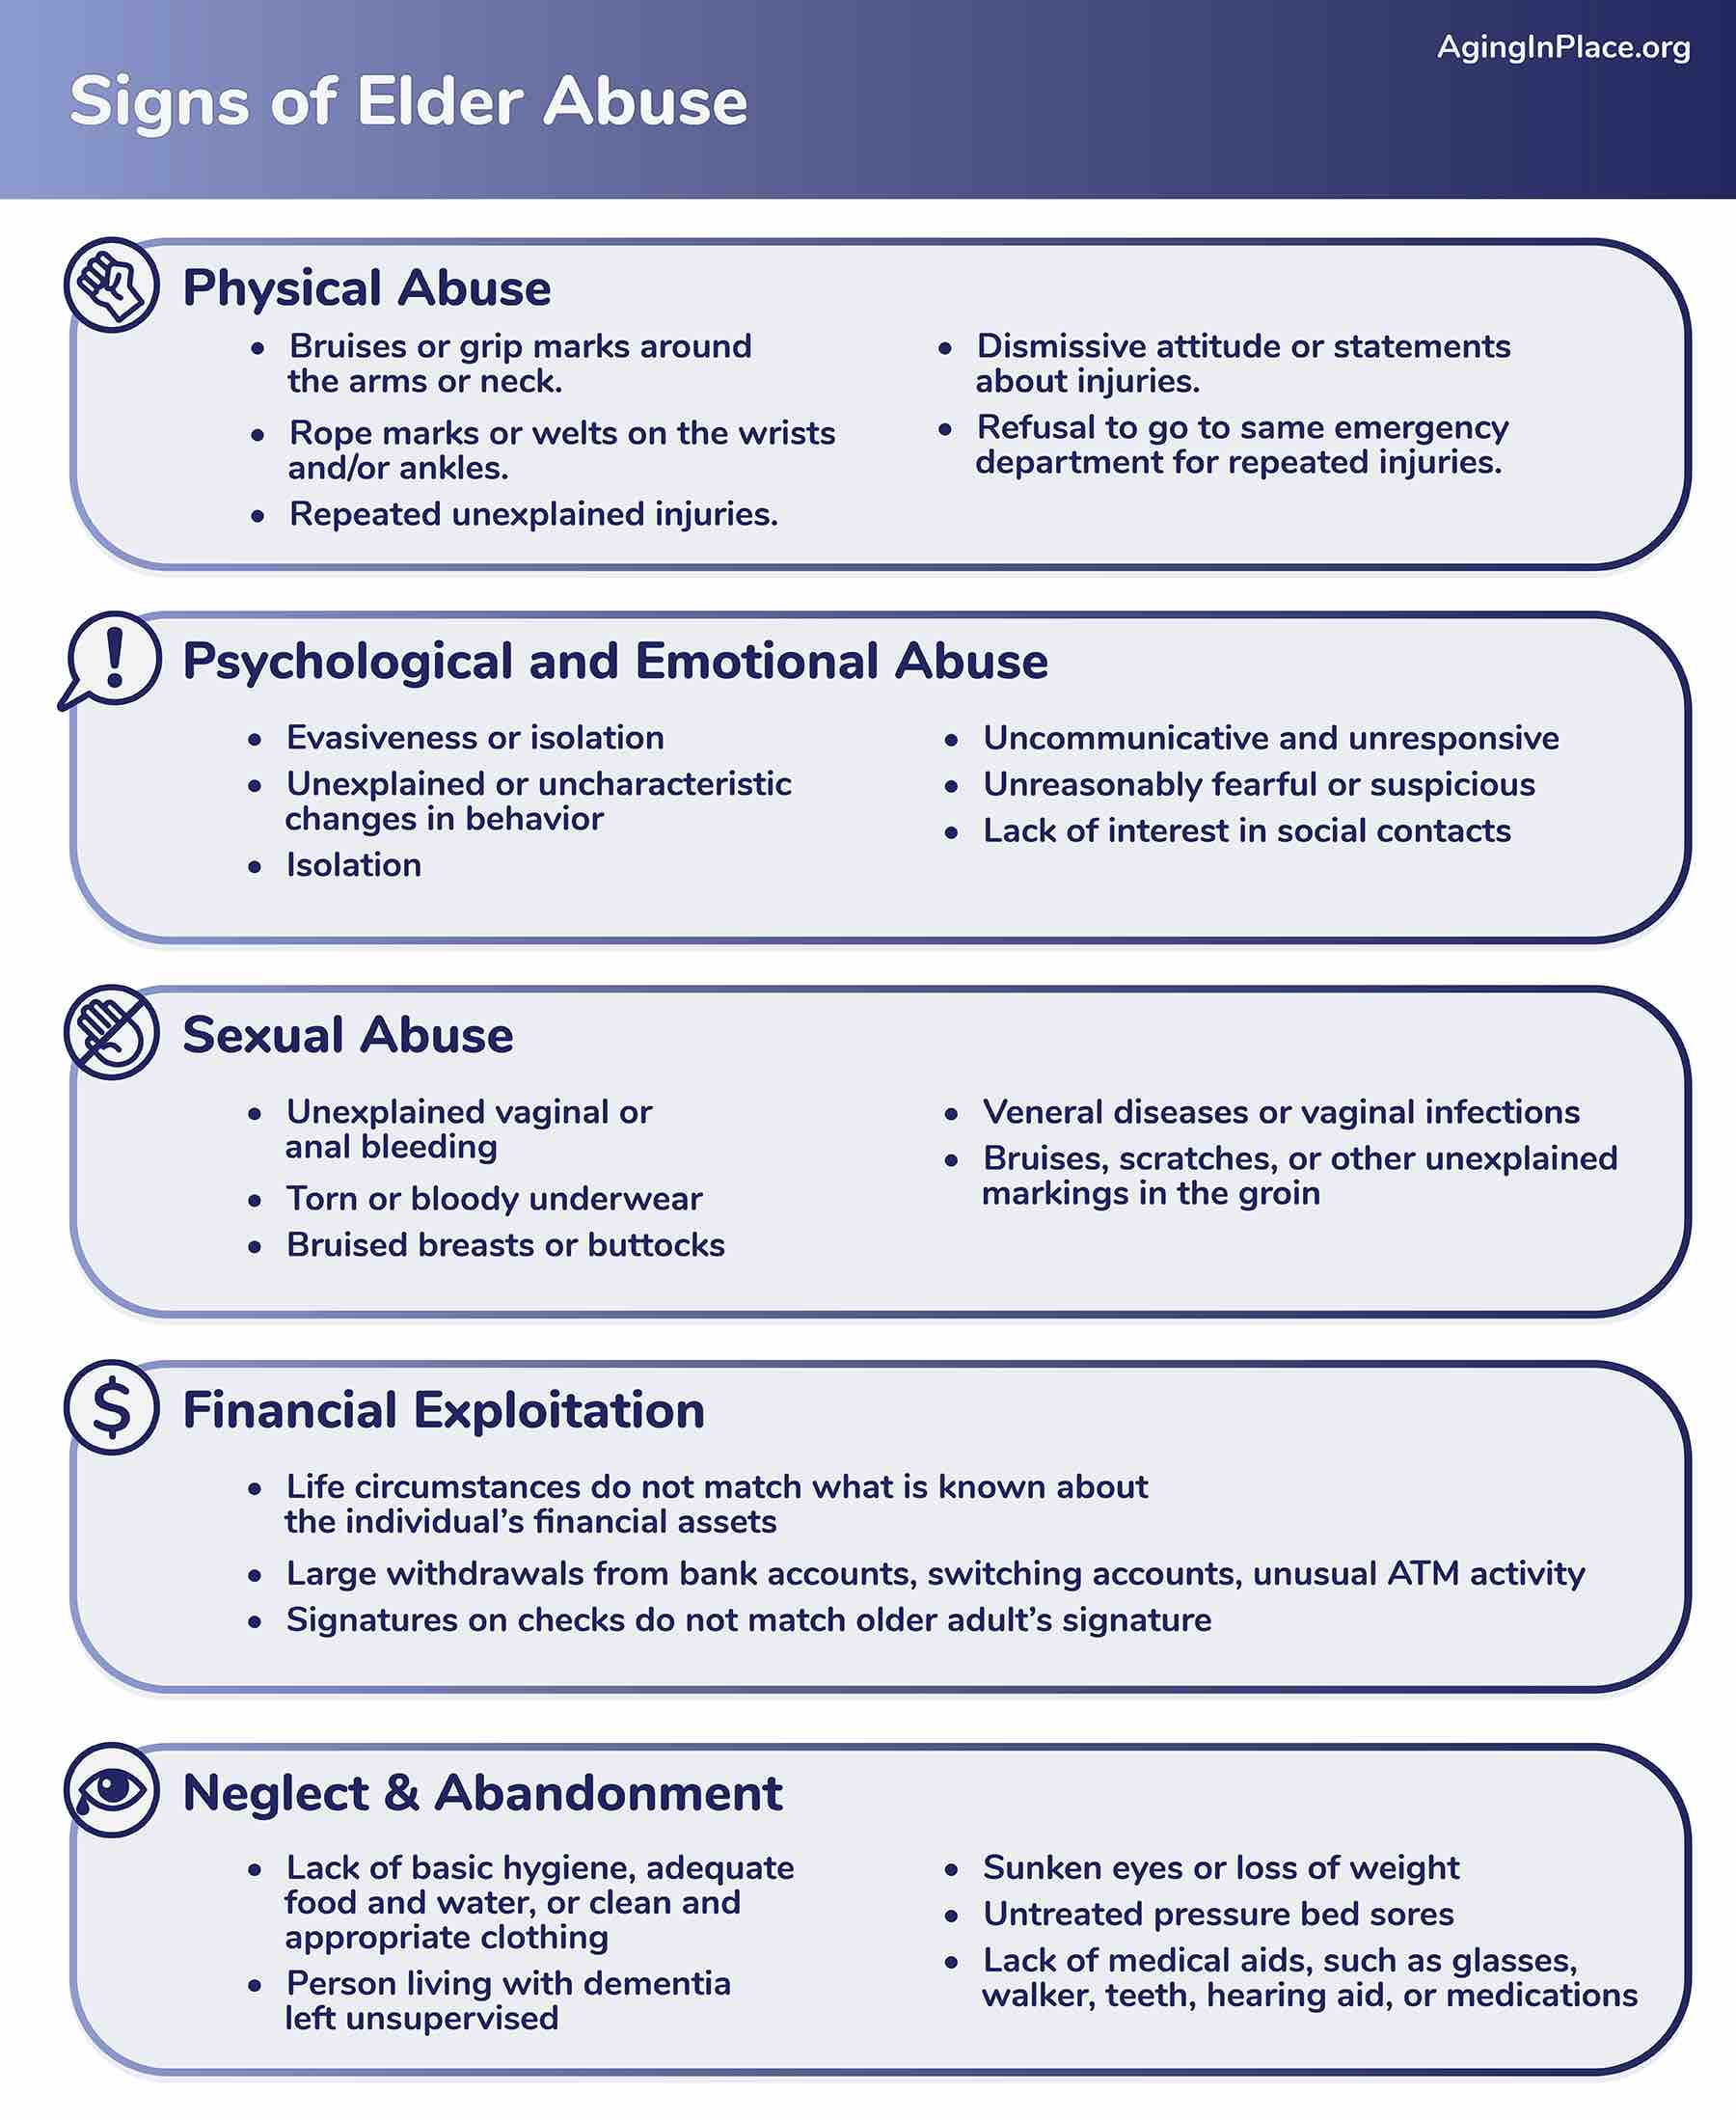 Signs of elder abuse graphic image